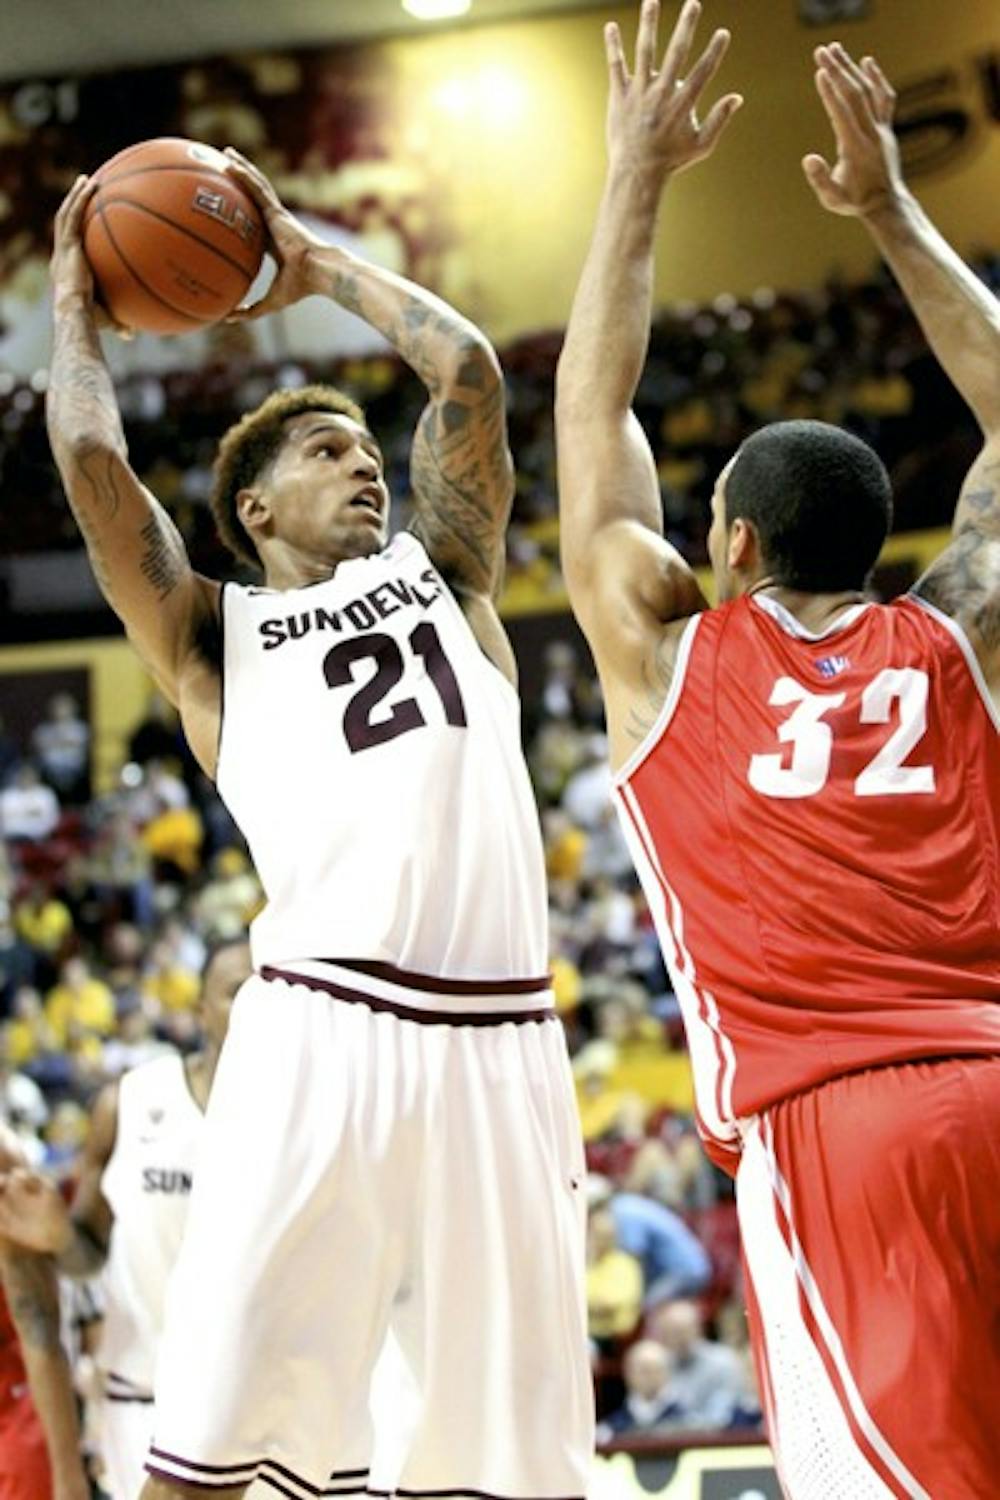 ASU sophomore guard Keala King (left) goes up for a layup against New Mexico senior forward Drew Gordon during the Sun Devils 76-71 loss to the Lobos on Nov. 17. The Sun Devils finished the Old Spice Classic in Orlando, Fla. 1-3 and are now 2-6 on the season. (Photo by Aaron Lavinsky)